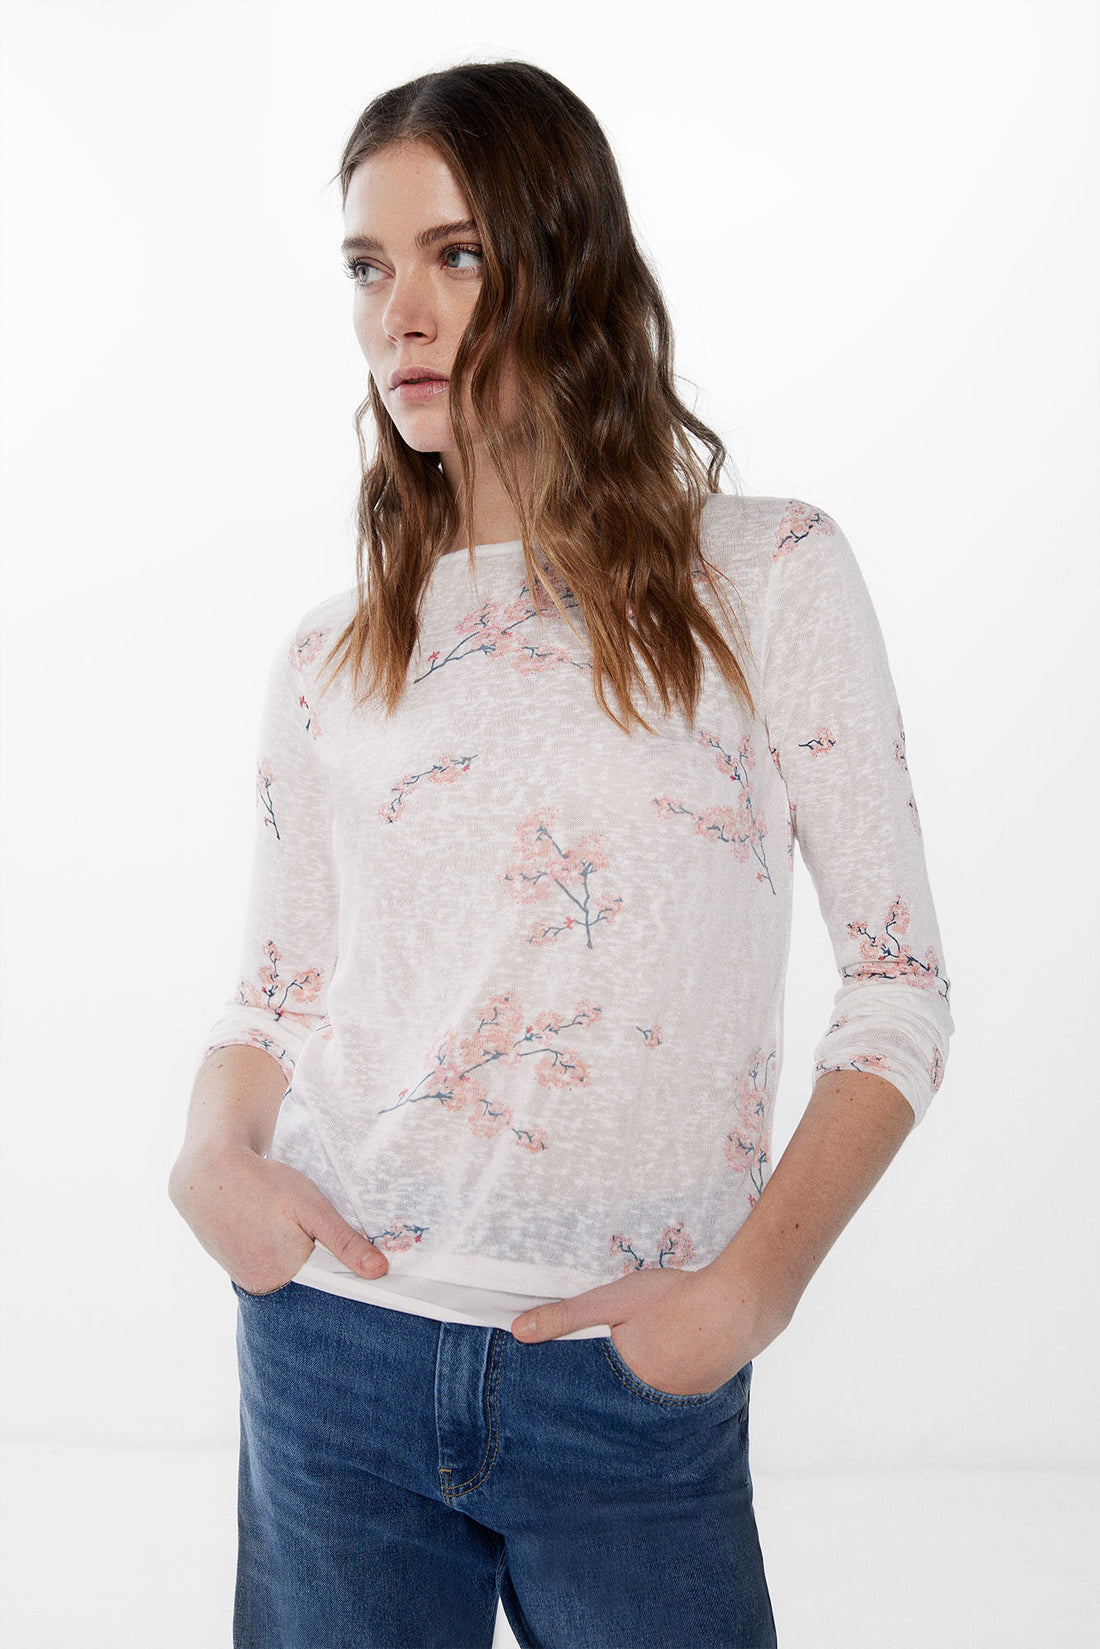 Long Sleeve T Shirt With Floral Print_6765945_50_01